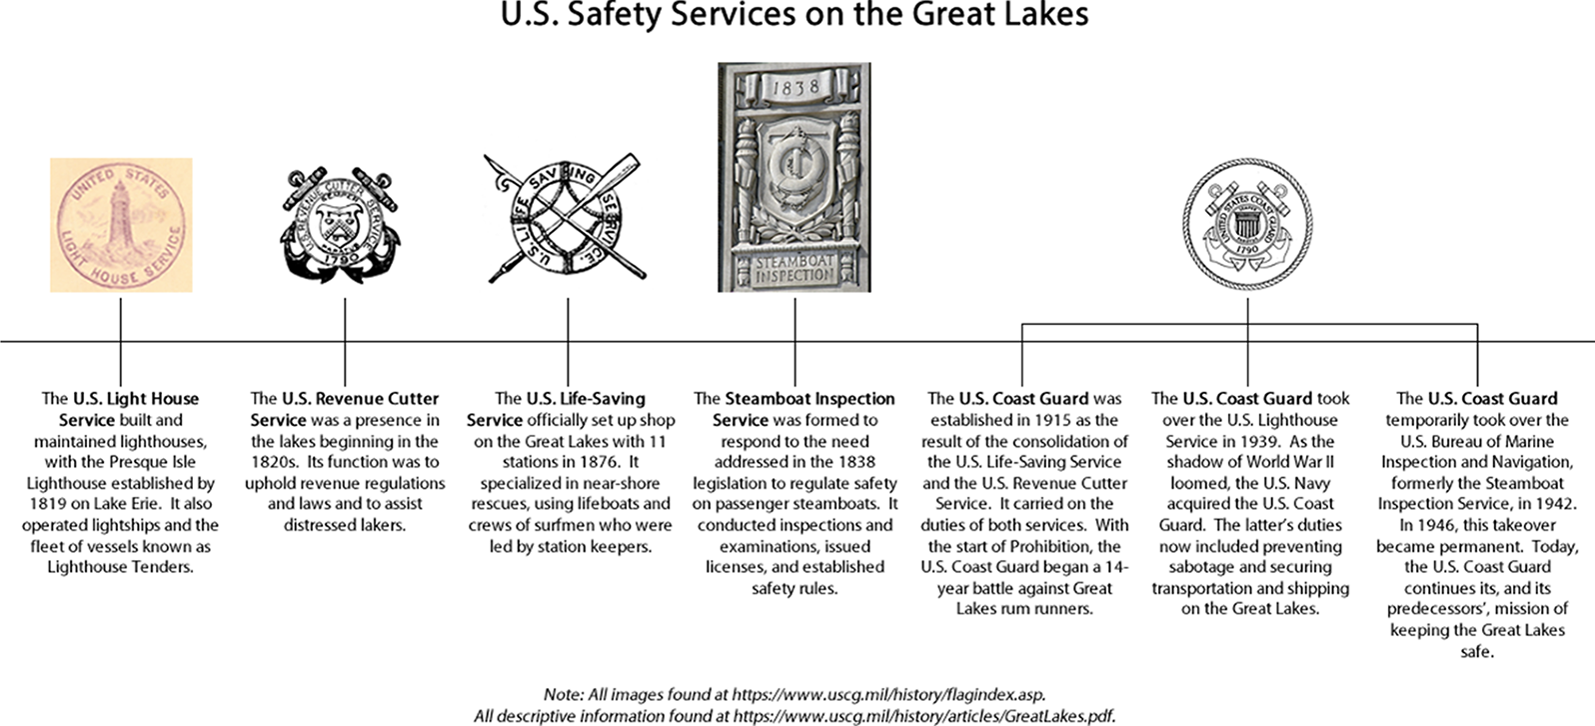 US Safety Services Timeline for the Great Lakes